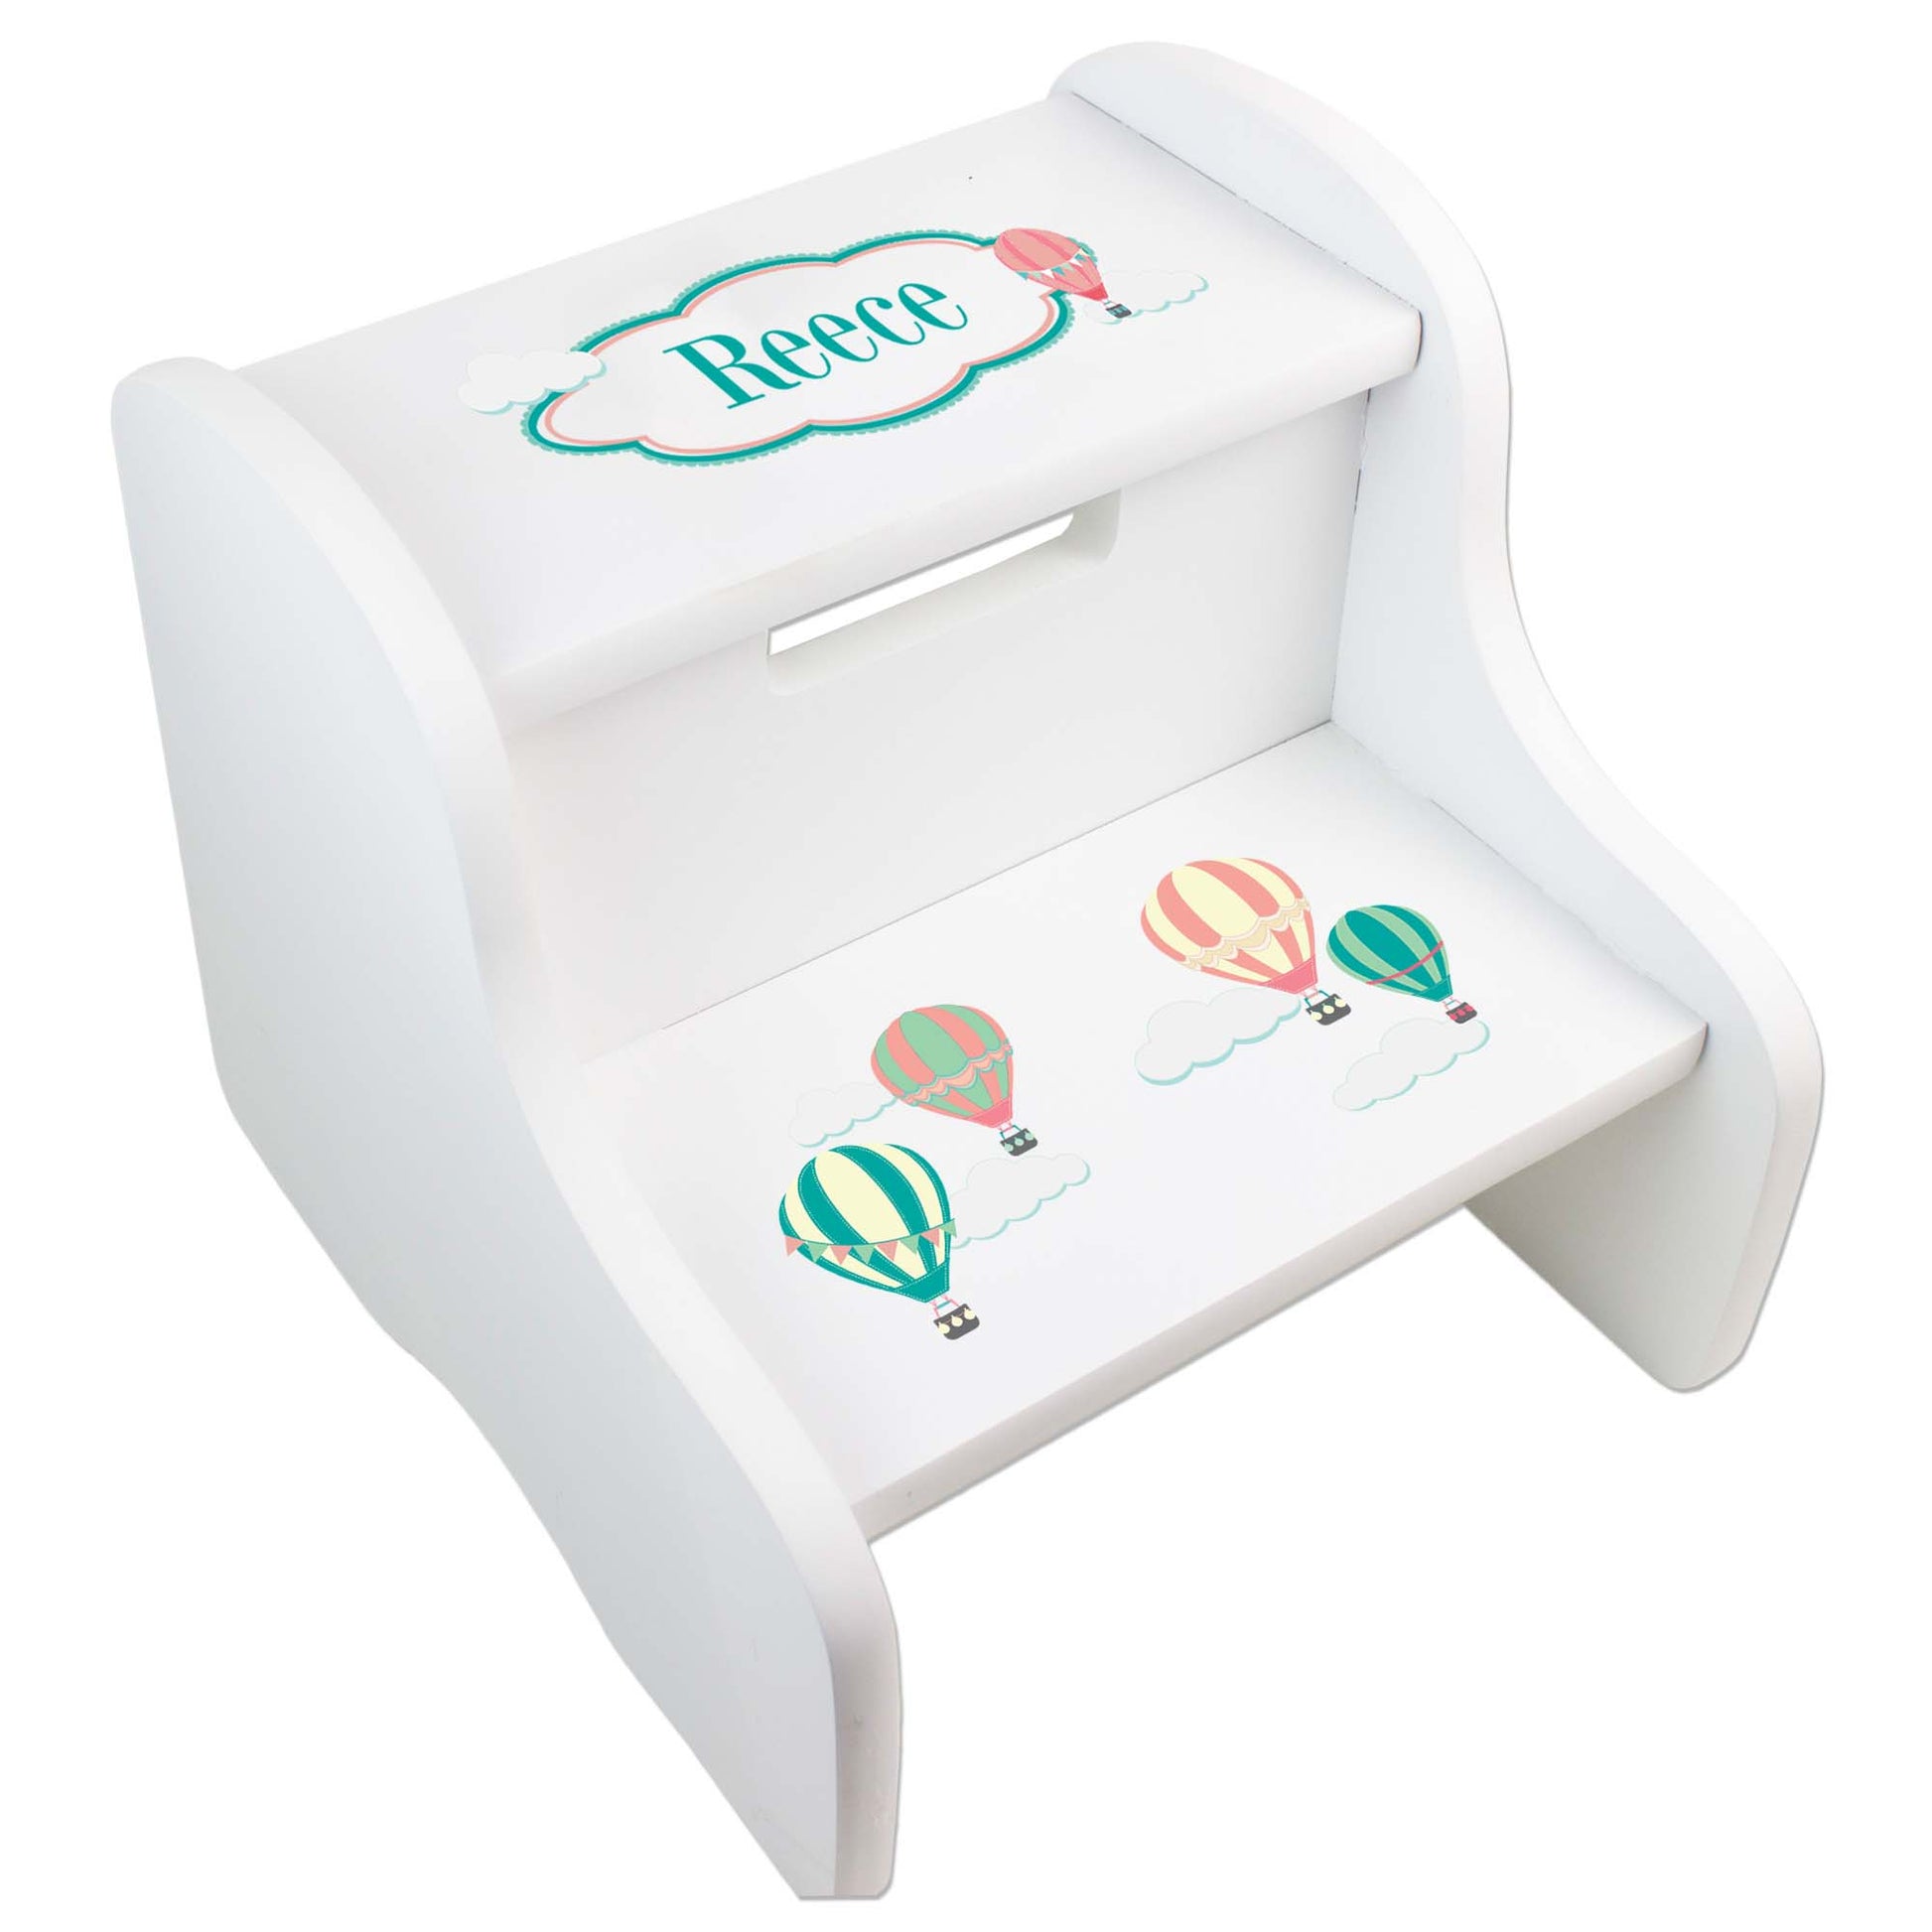 Personalized Hot Air Balloon Step Stool